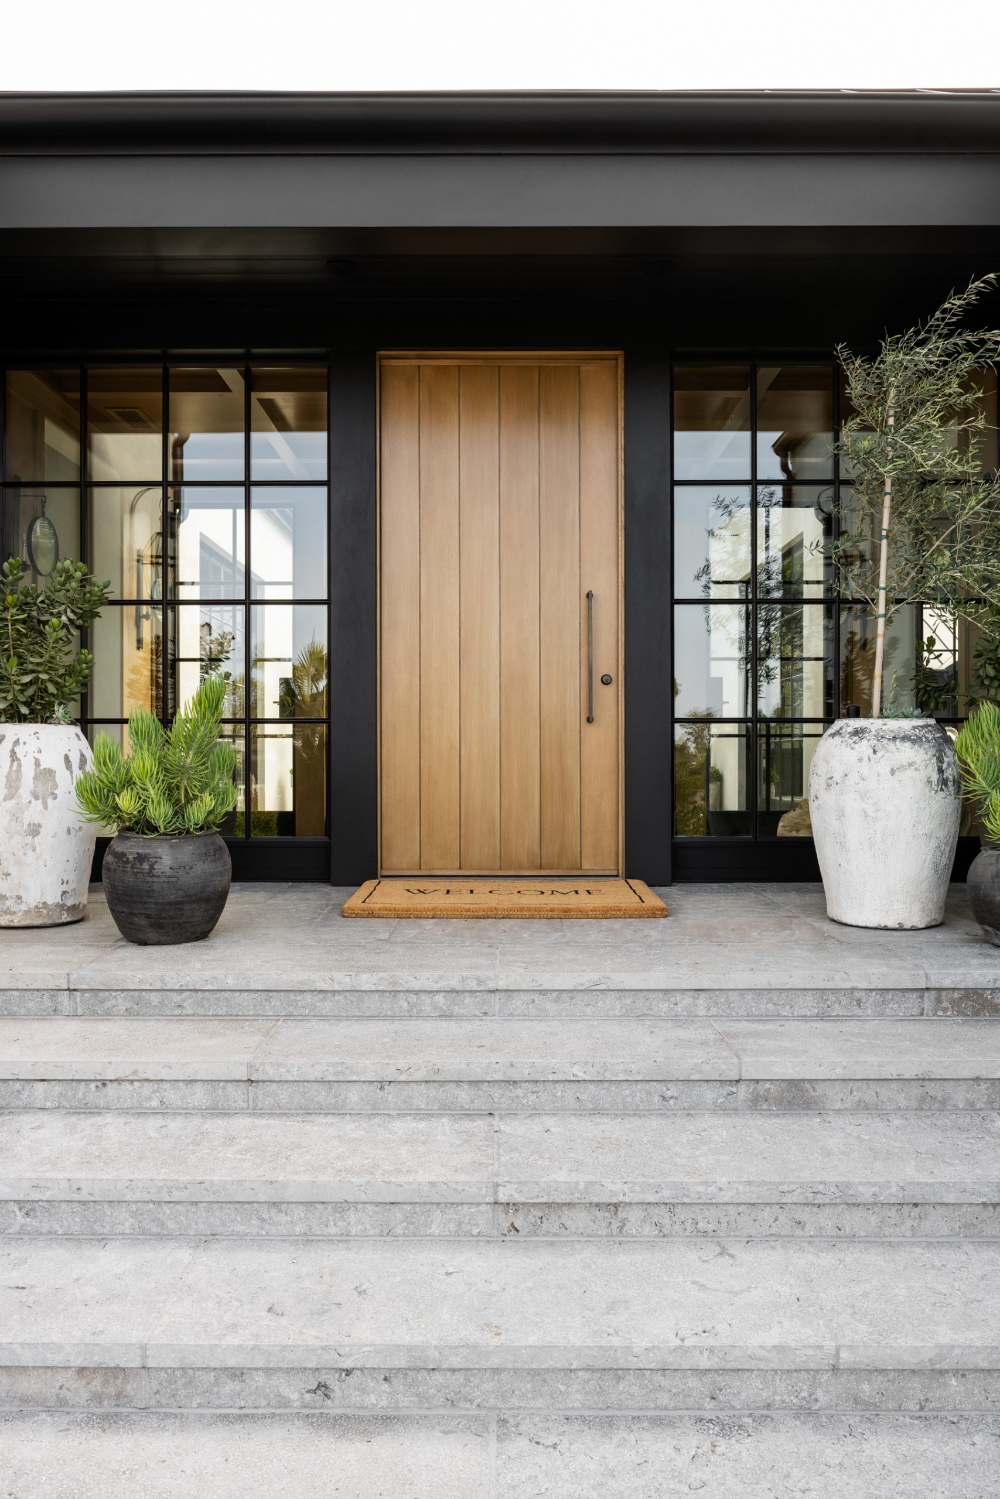 Welcome Home: Front Door Designs That Make an Impression